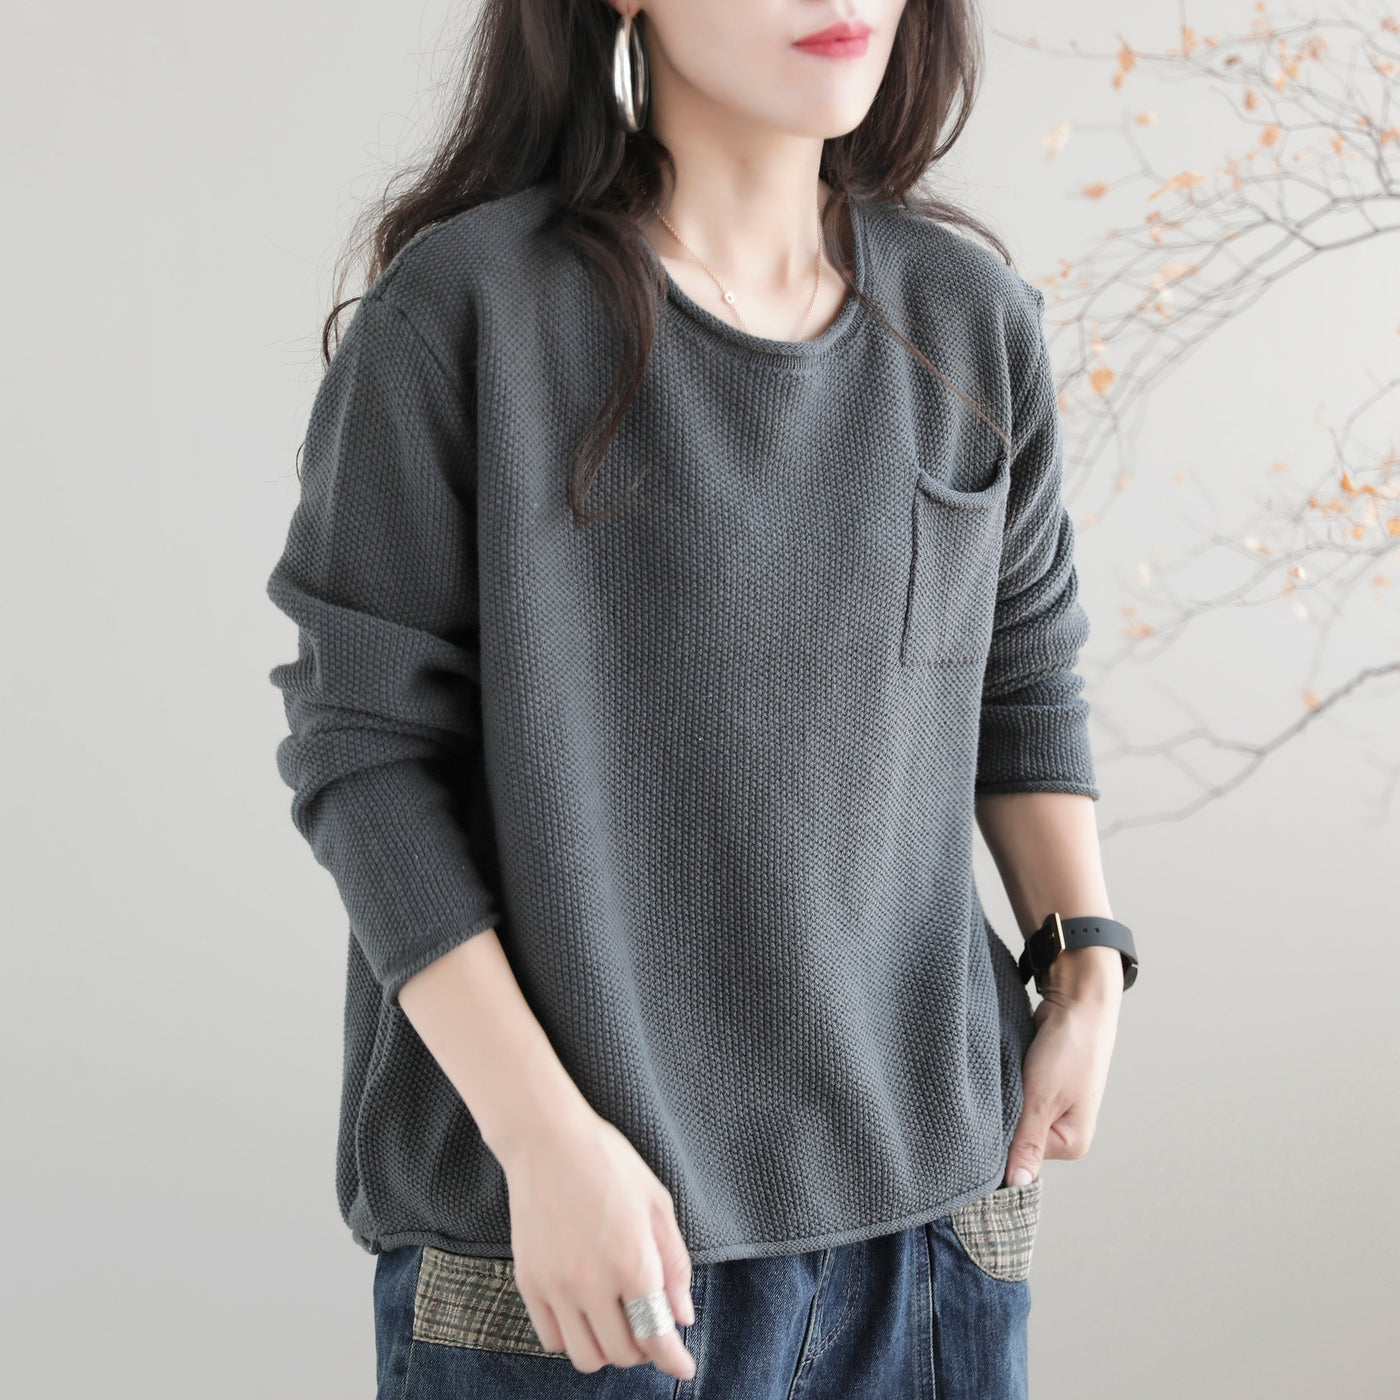 Women Autumn Solid Retro Cotton Knitted Sweater Aug 2022 New Arrival One Size cement ash 